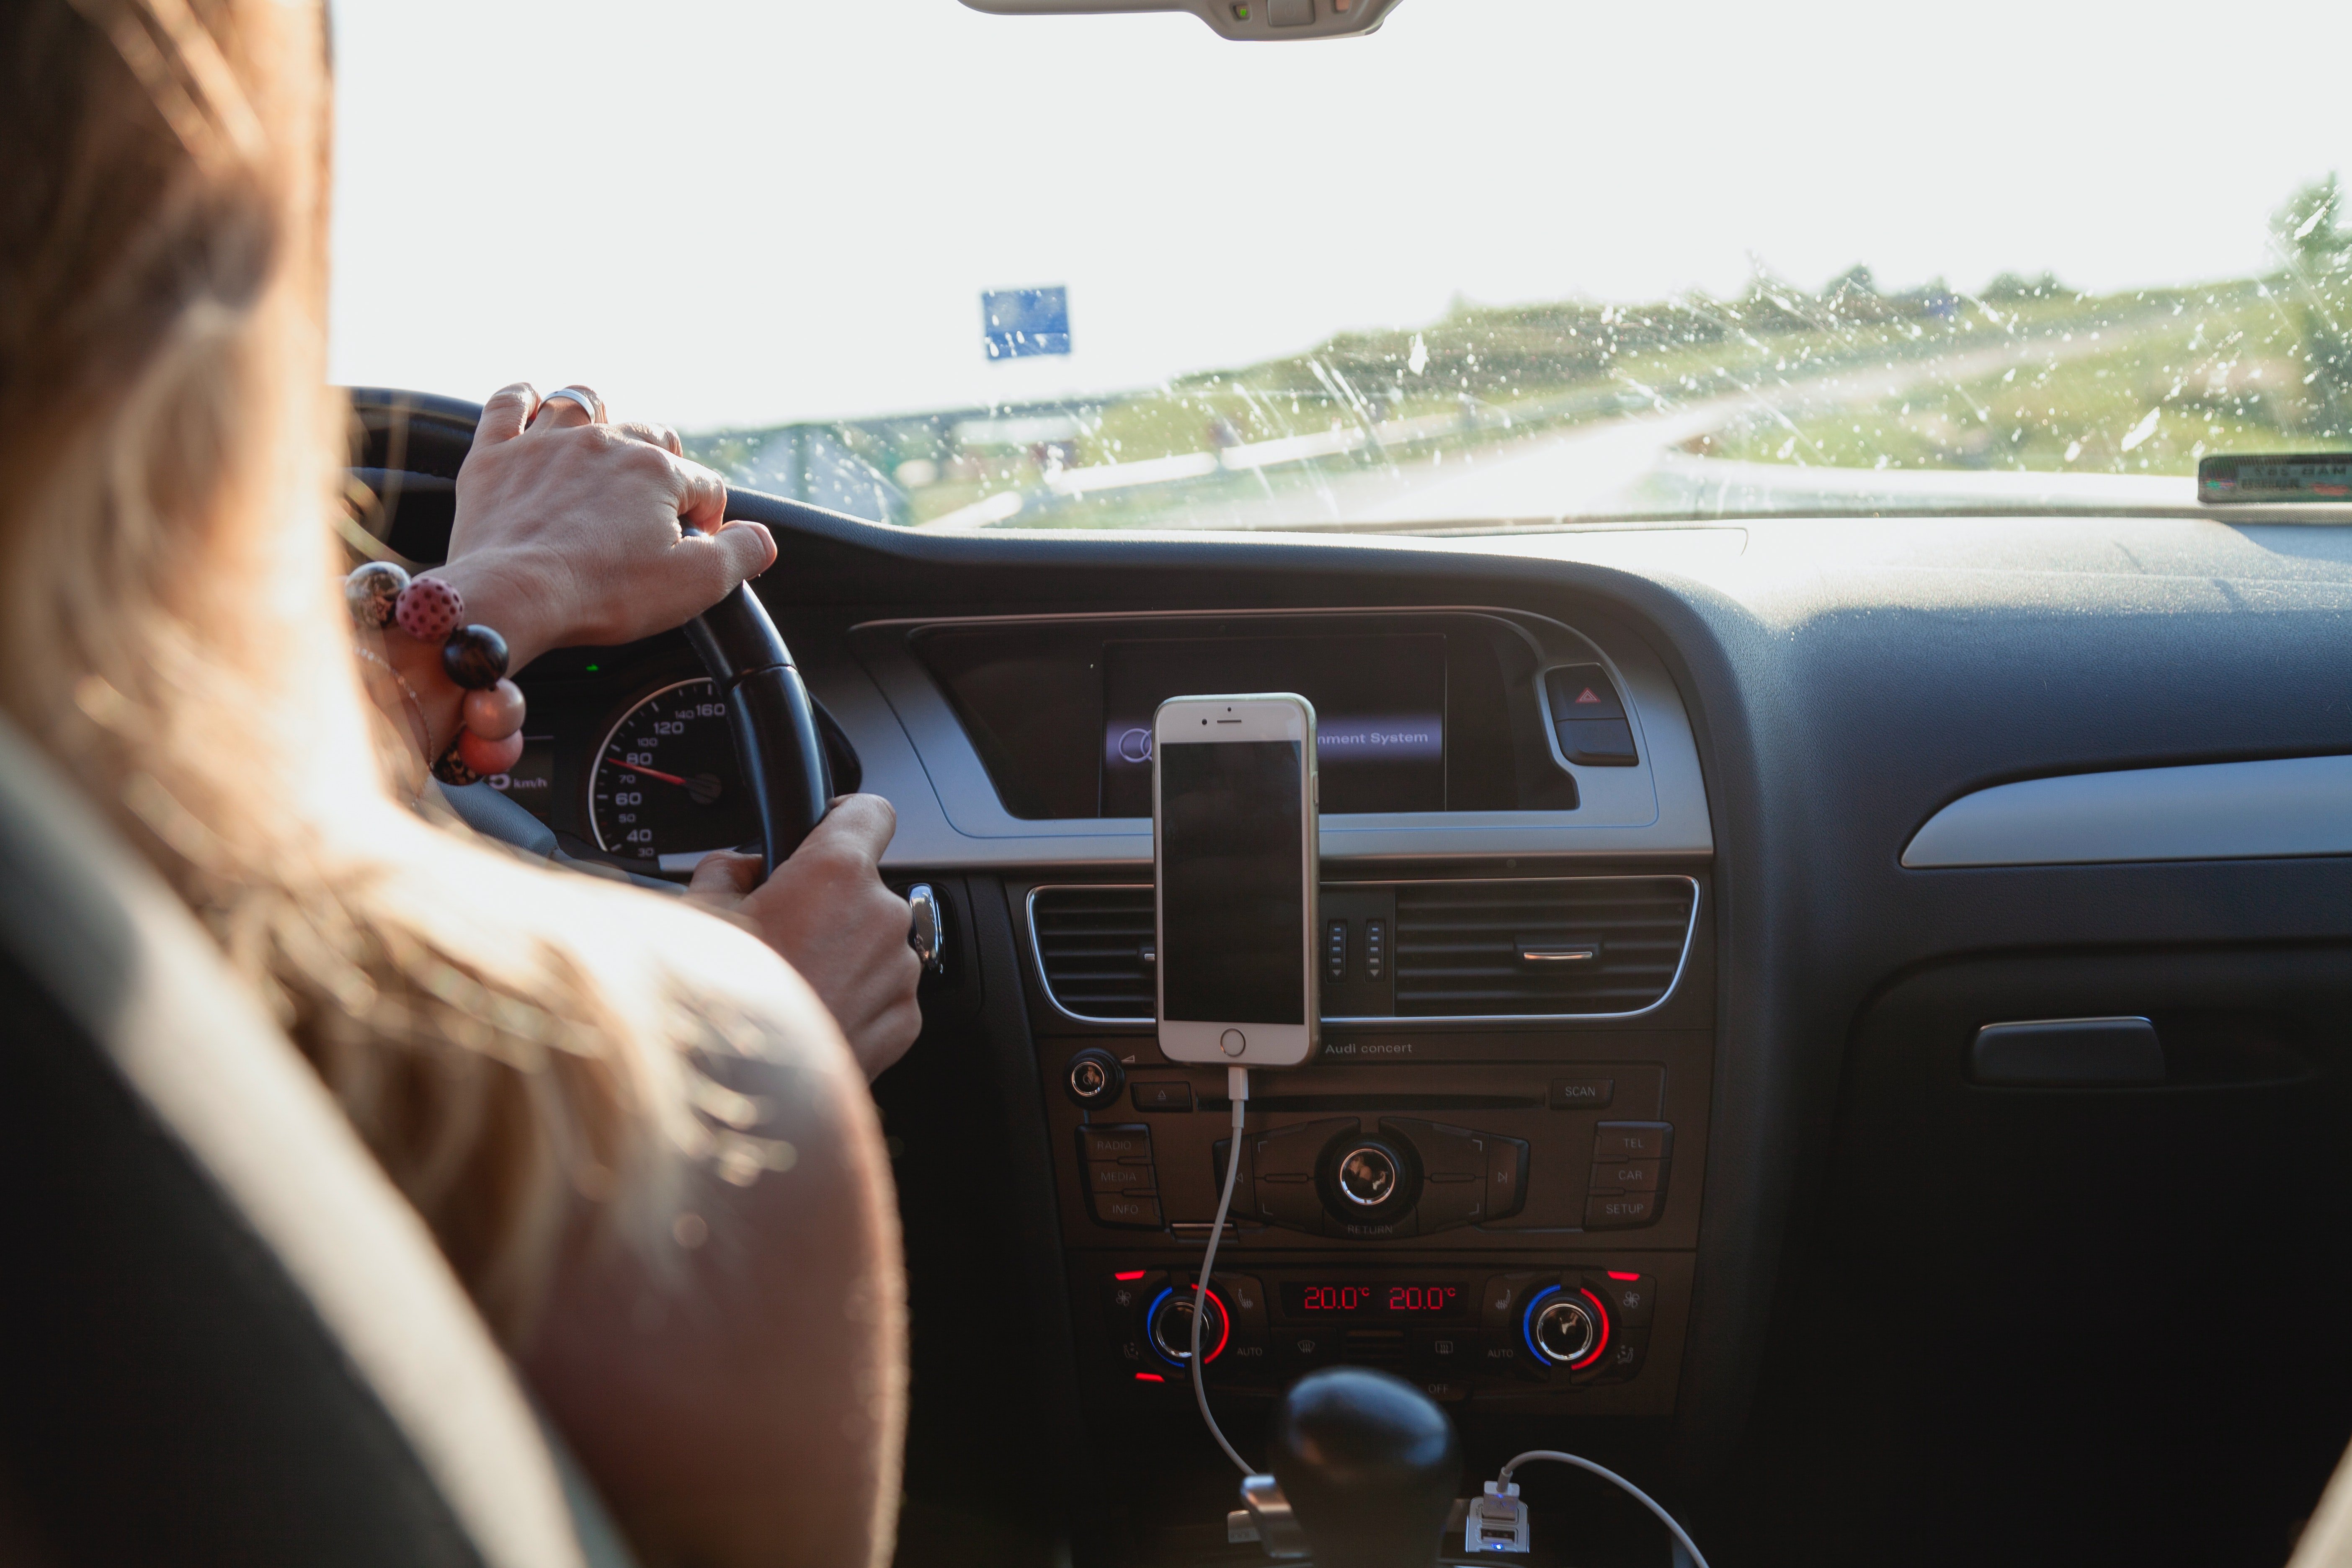 Agatha was driving on the same highway to meet her daughter. | Source: Pexels